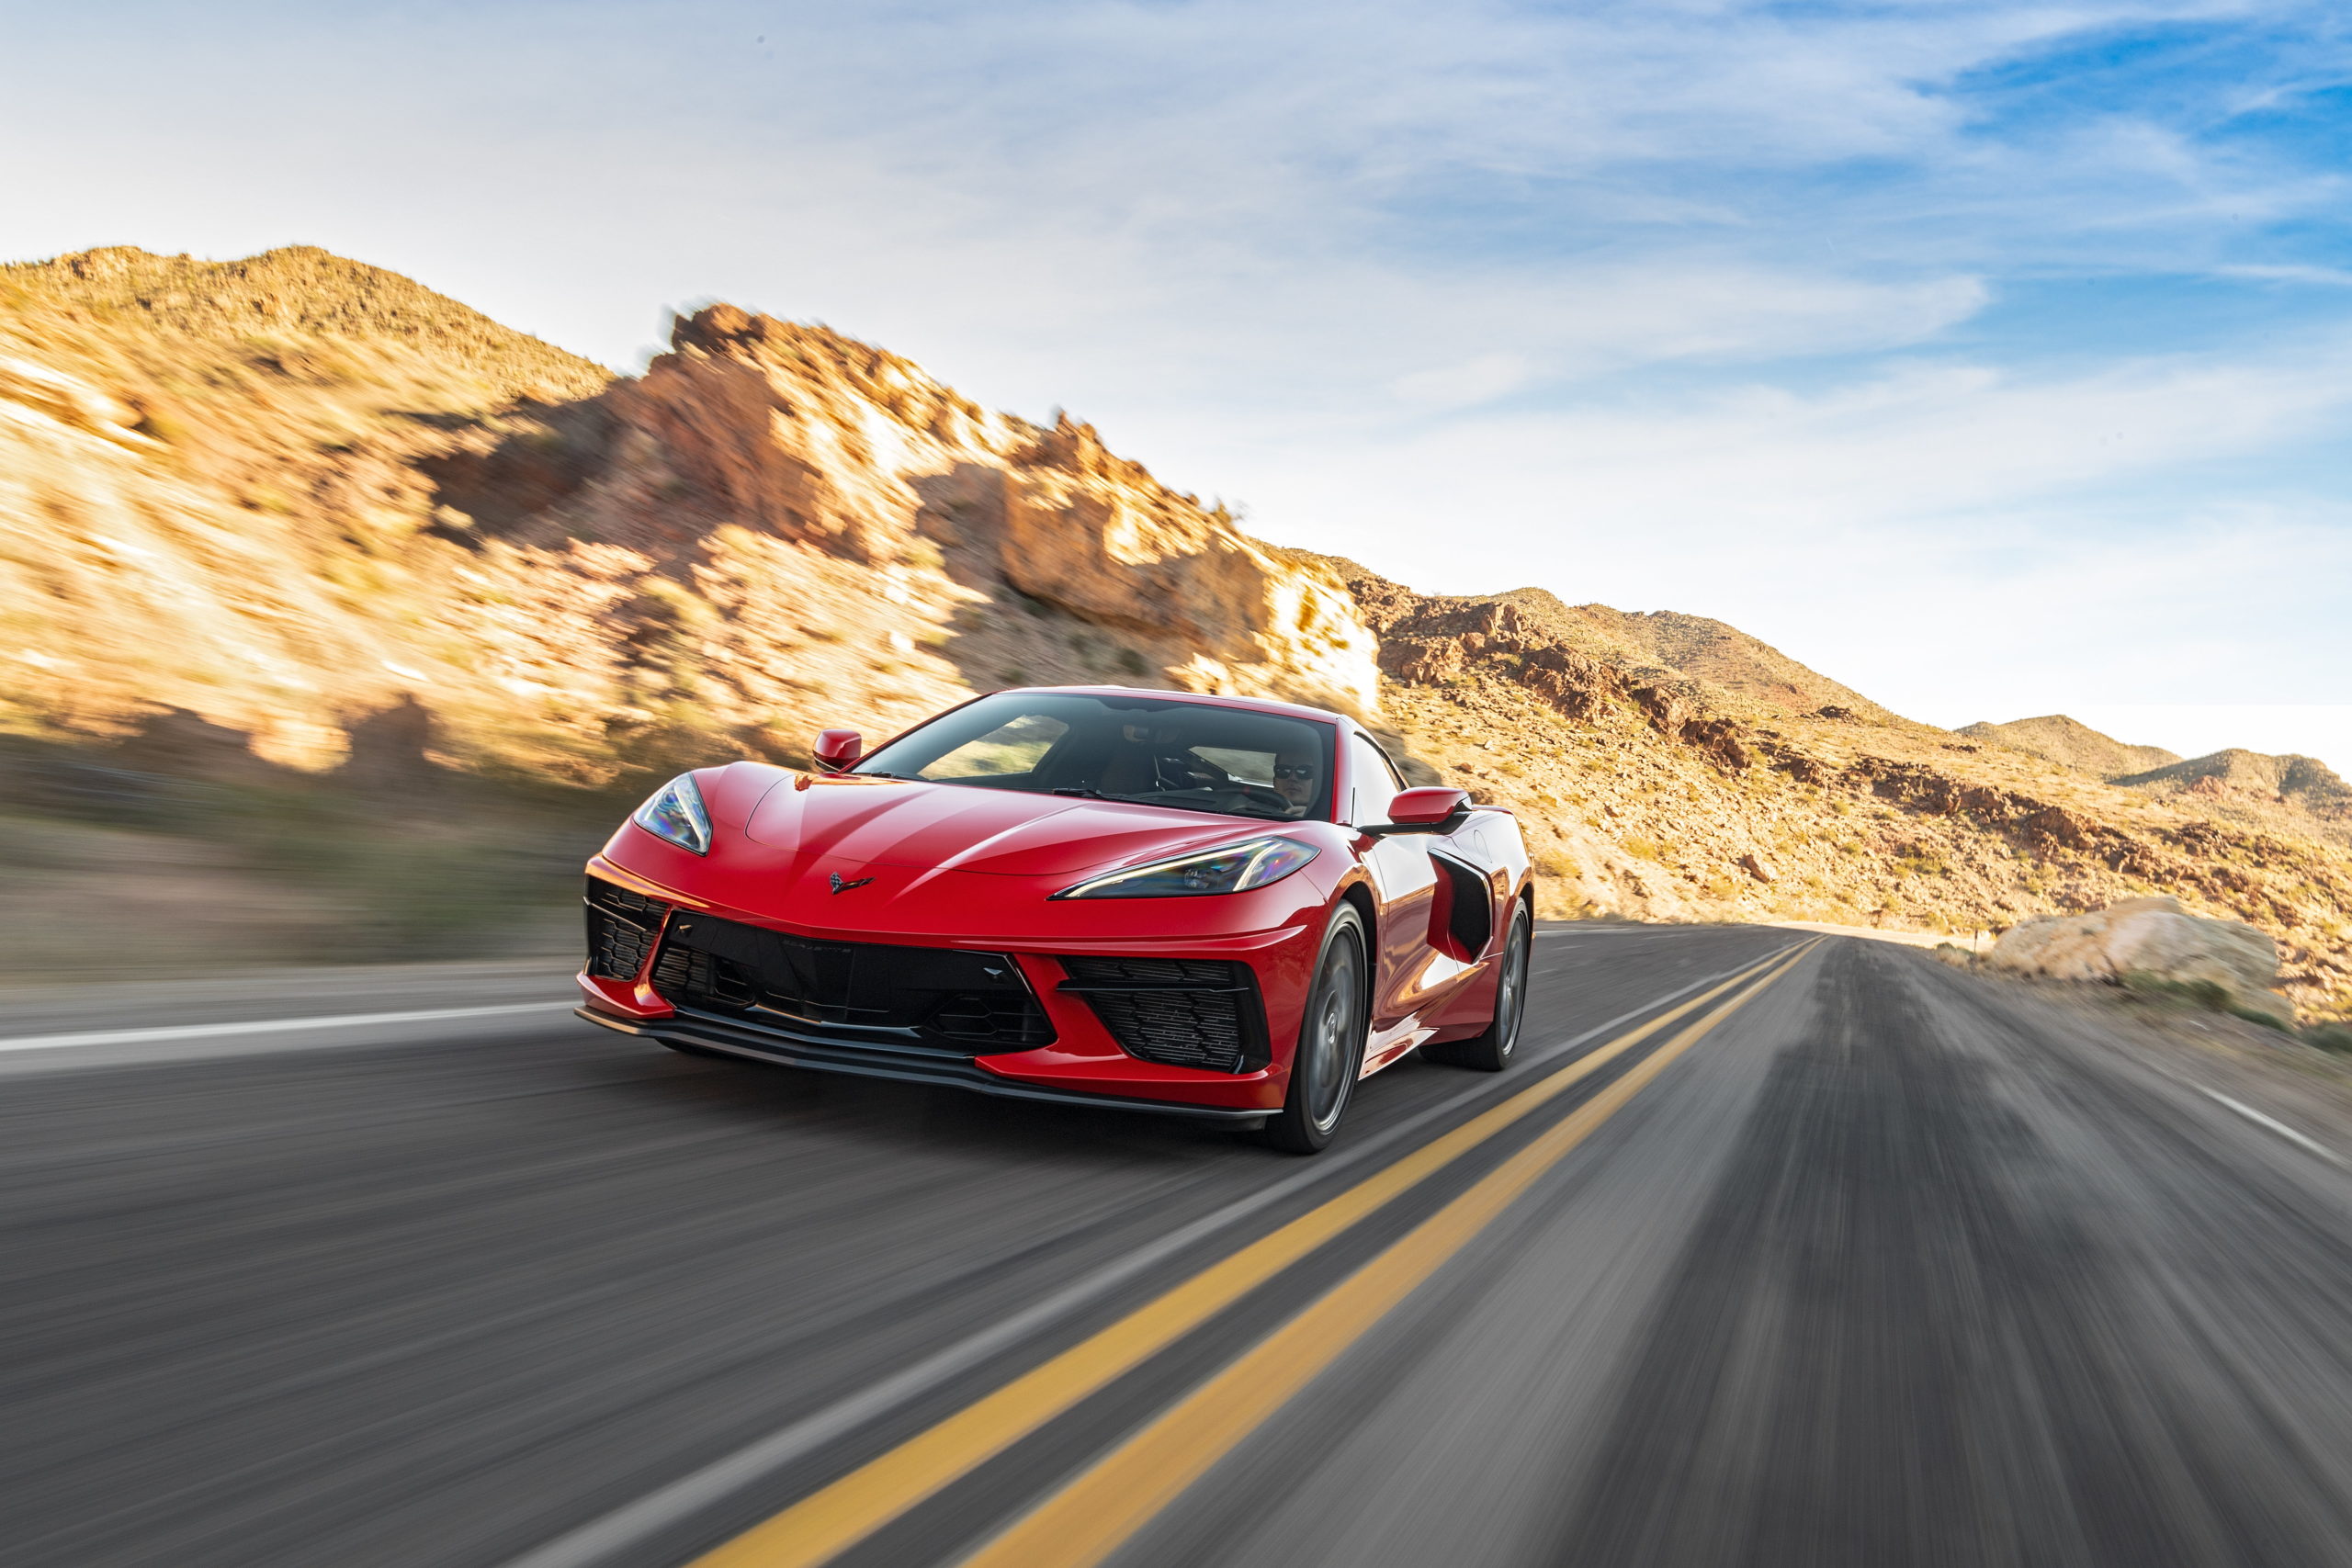 Corvette Documentary Goes Behind-the-Scenes of C8 Design -- Part 2 | THE SHOP